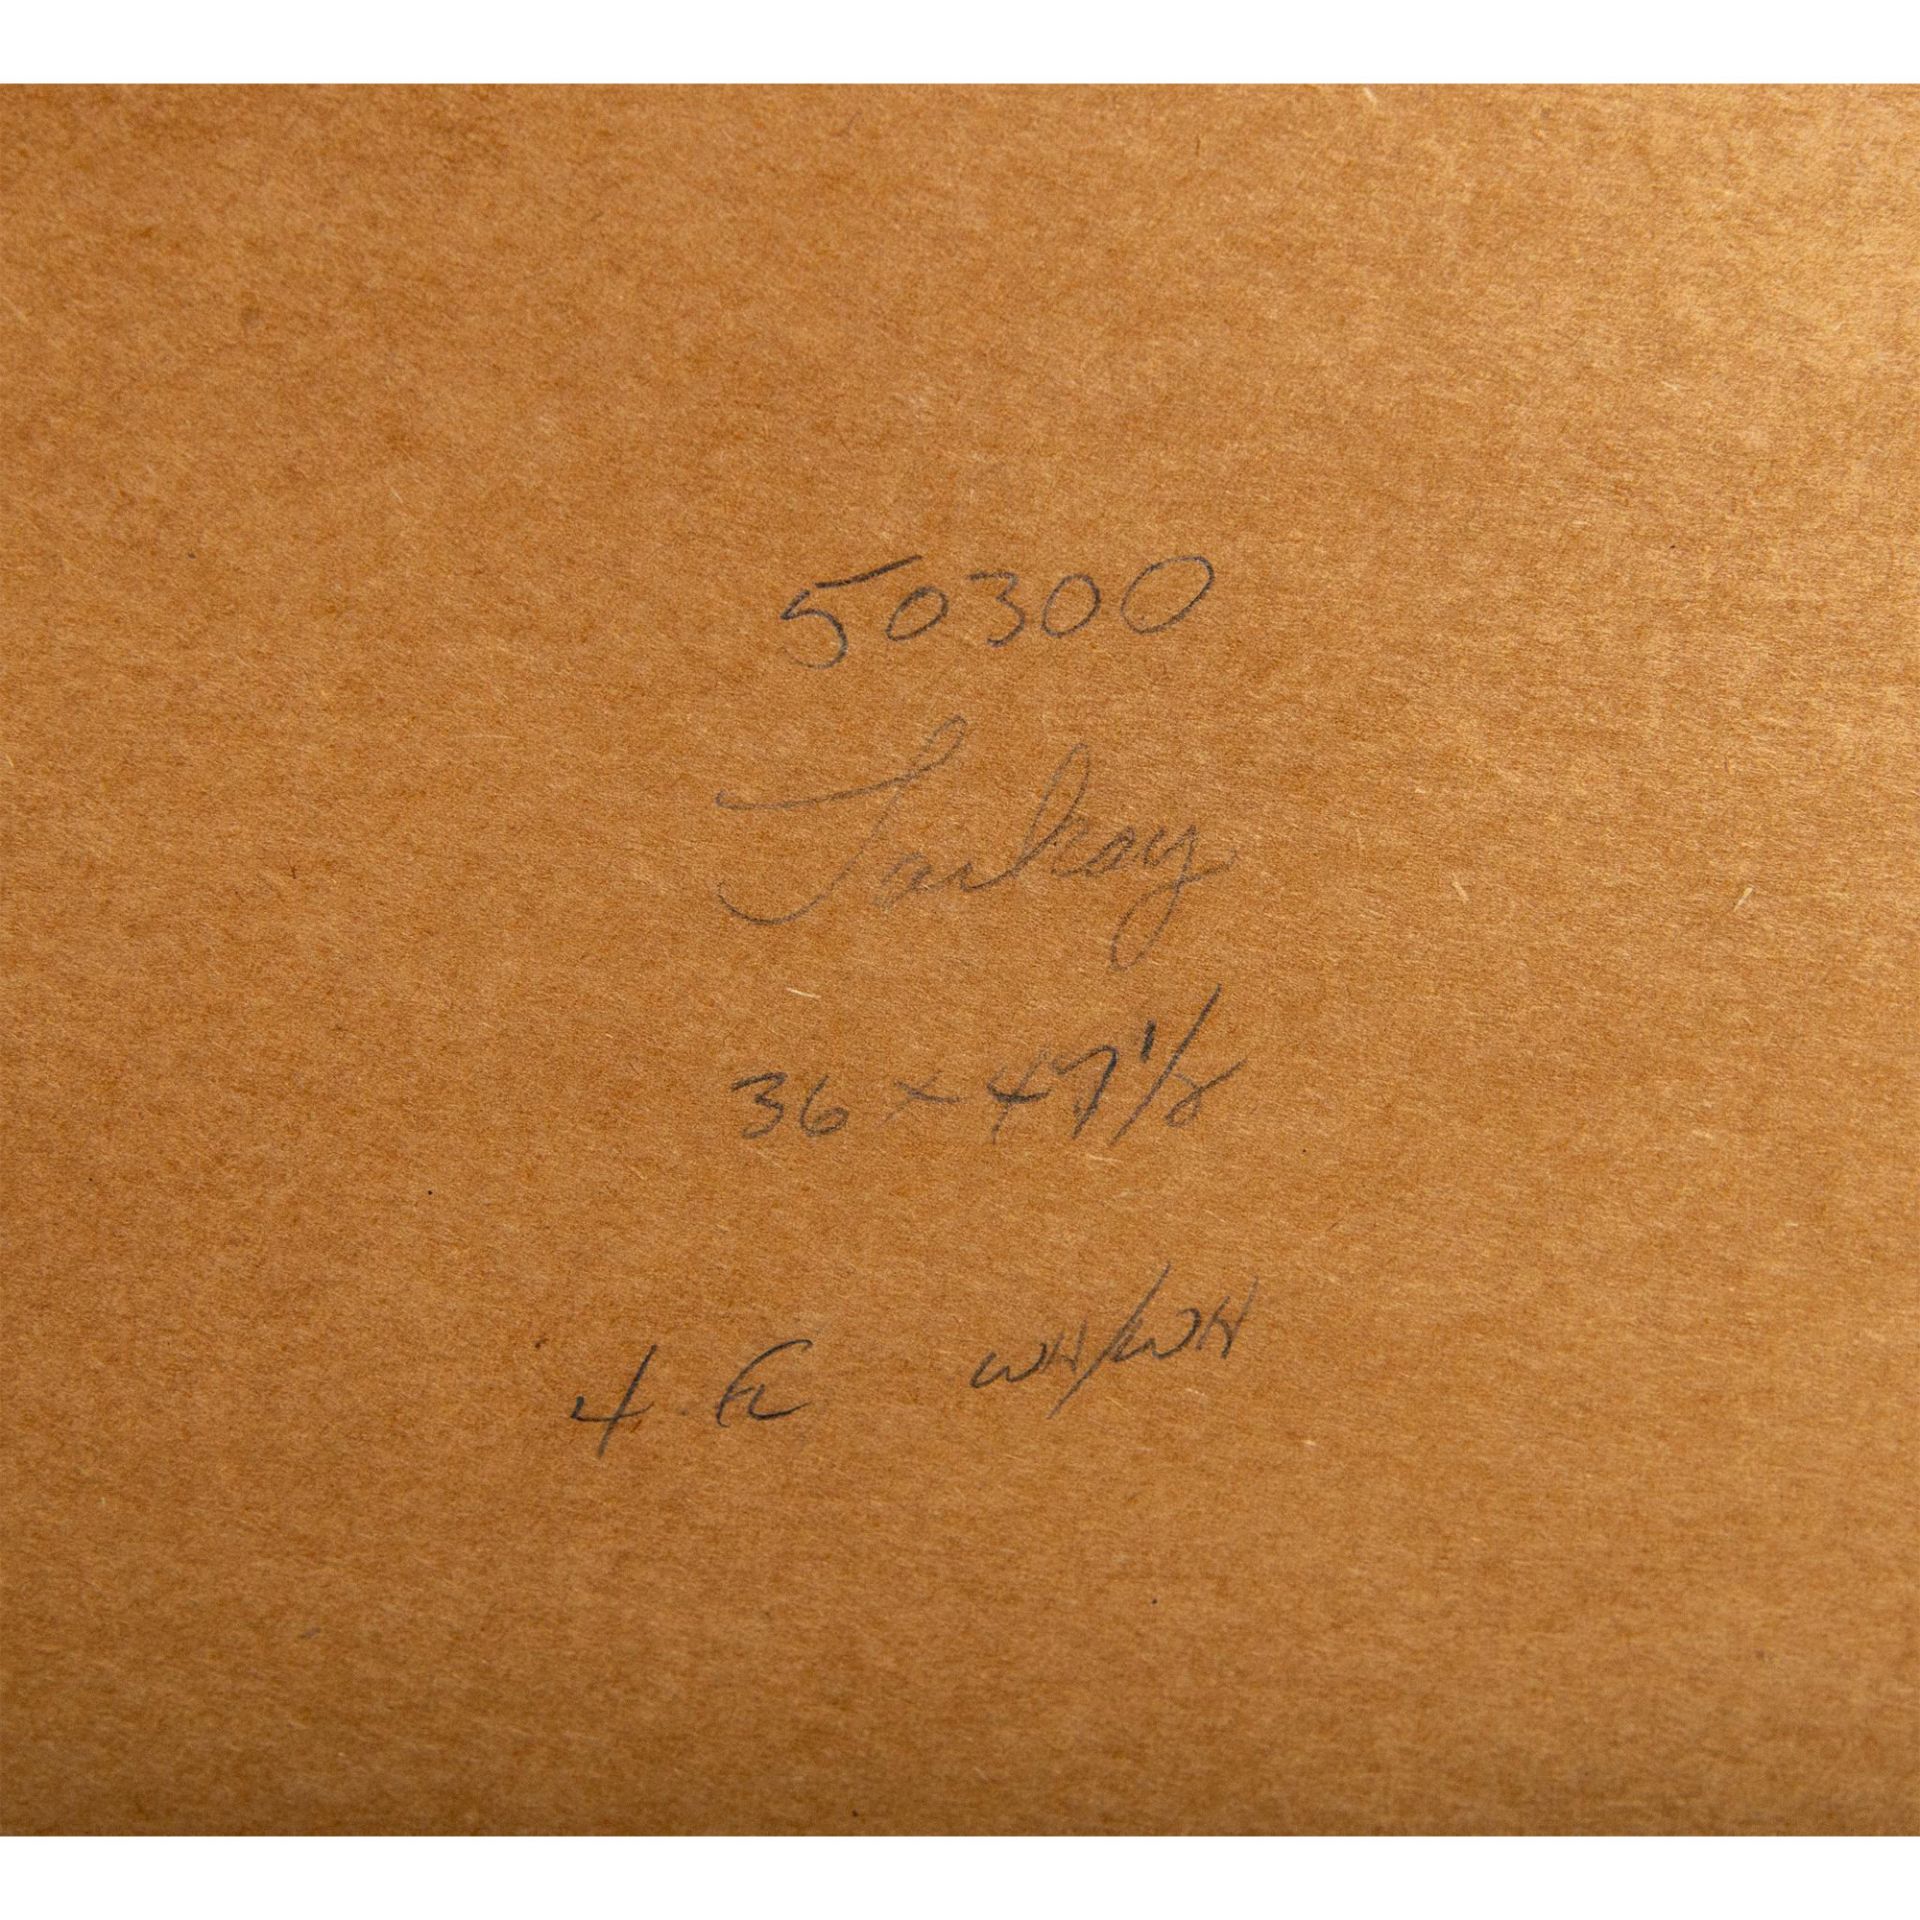 Itzchak Tarkay, Color Serigraph on Fabriano Paper, Signed - Image 6 of 8